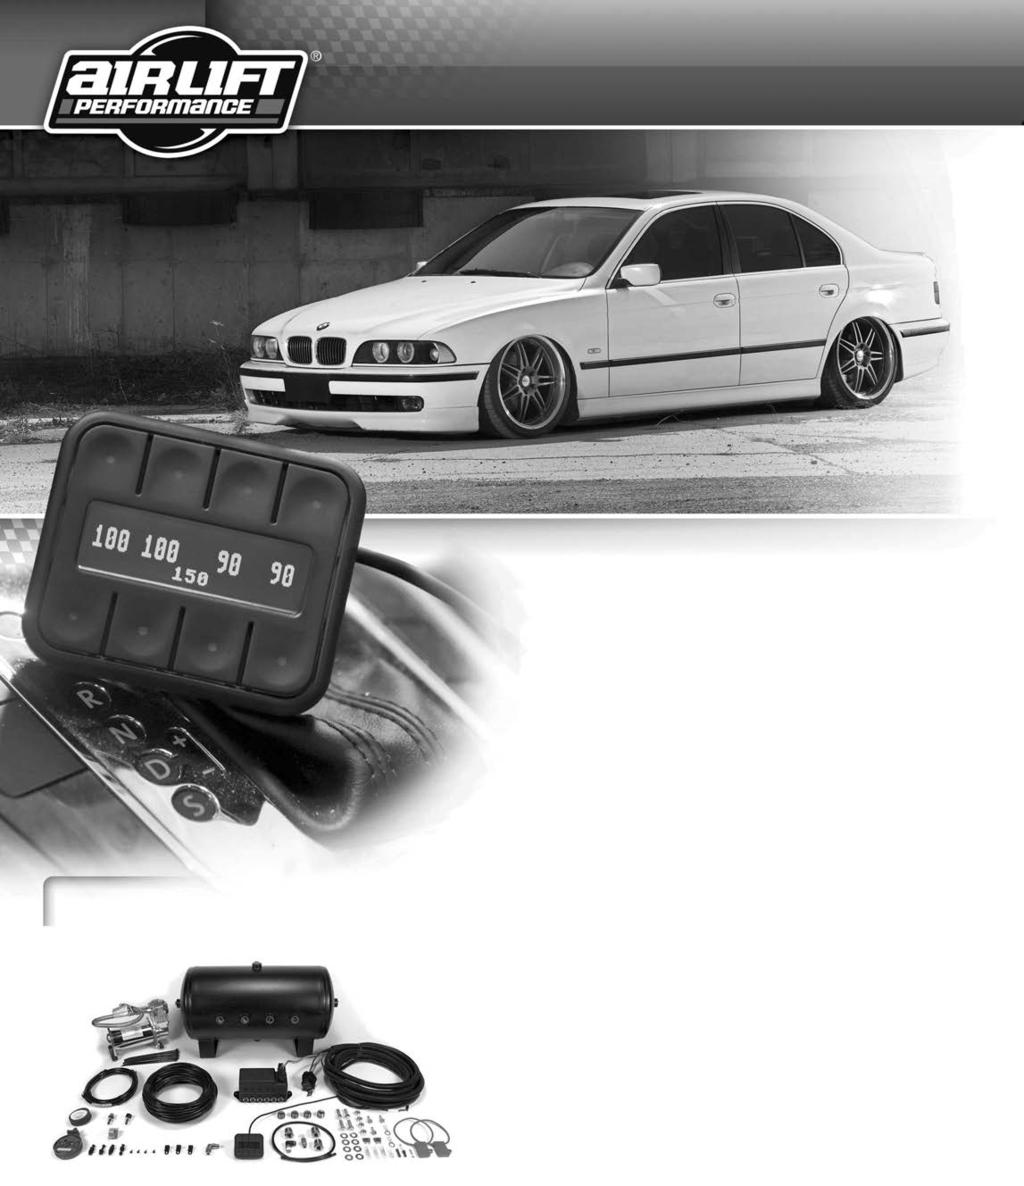 AutoPilot V2 Performance Air Management Systems The most advanced pressure-based air suspension control system ever!